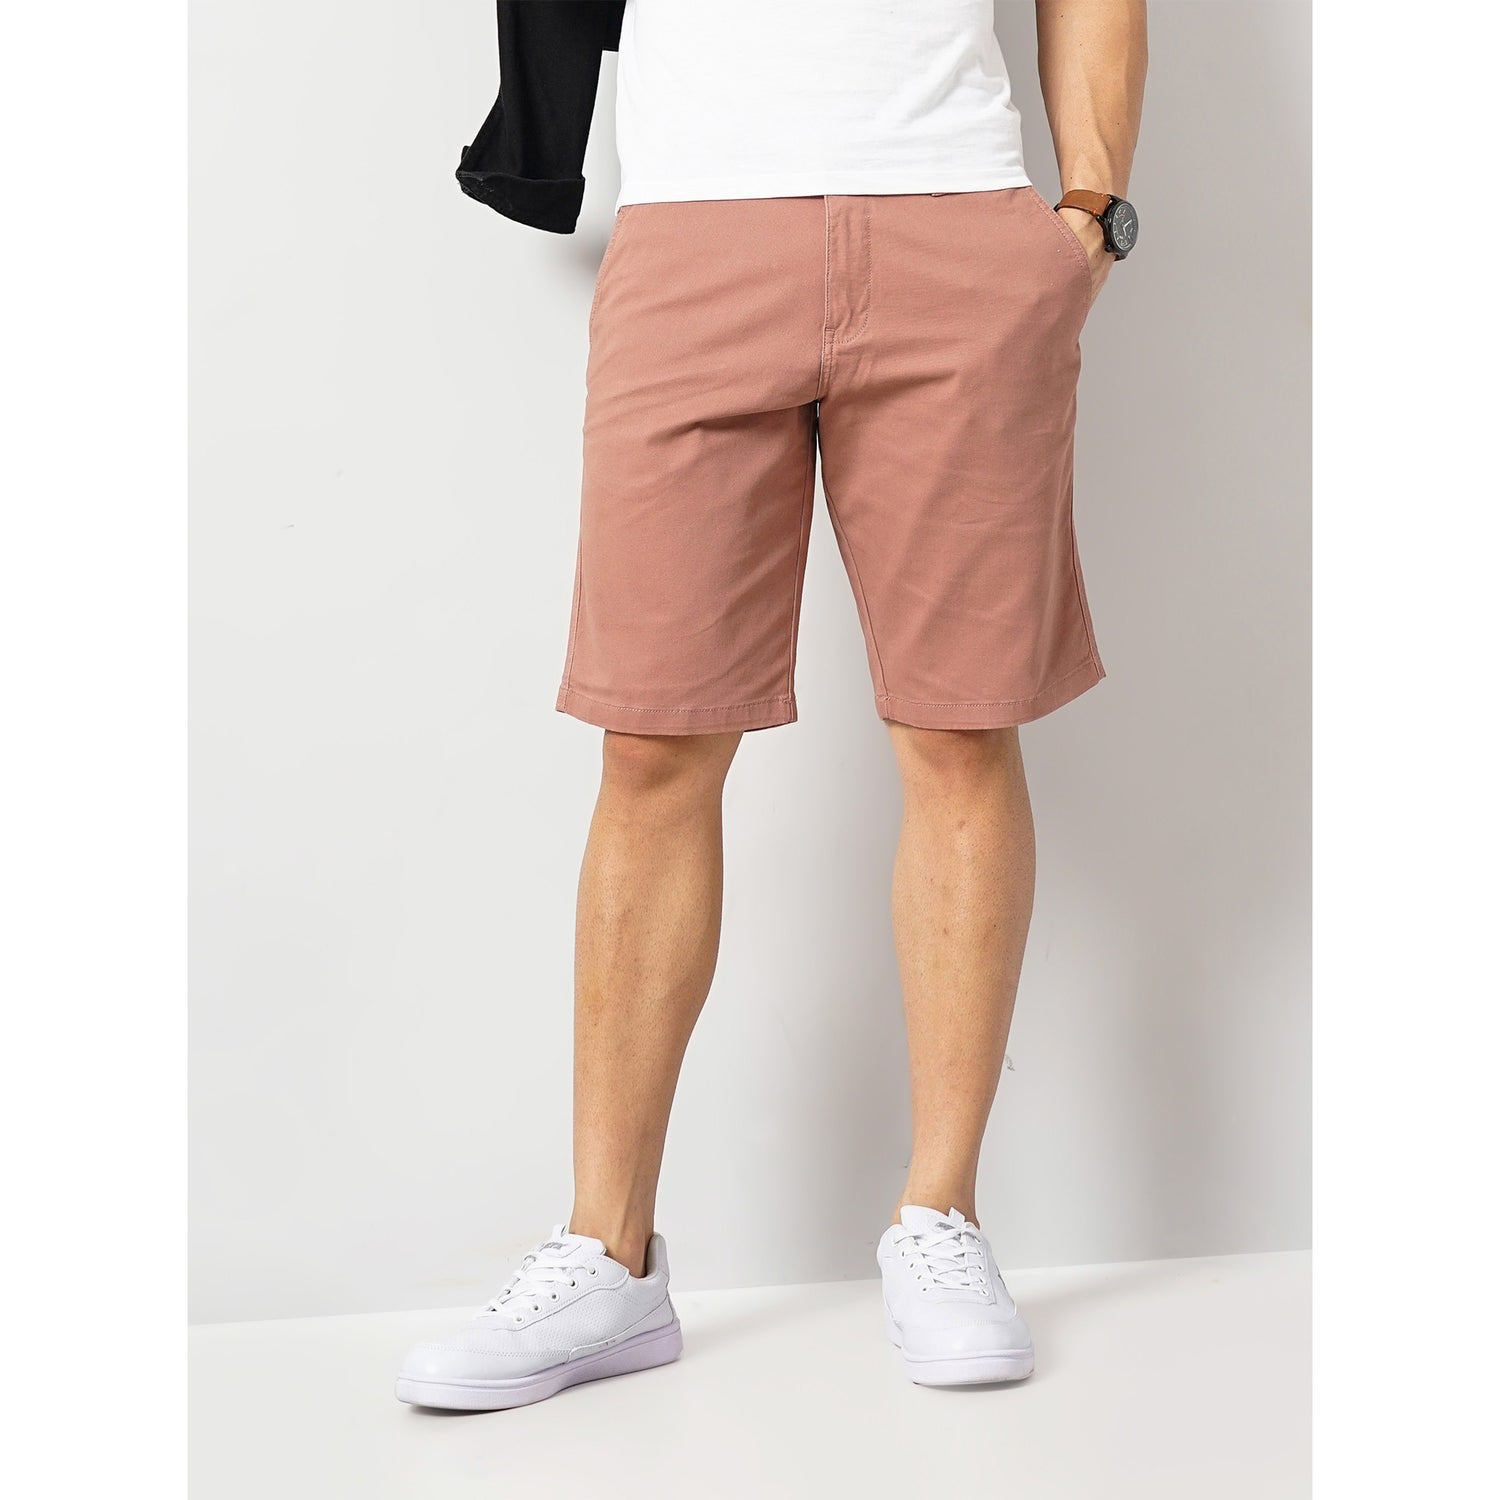 Solid Pink Cotton-Blend Shorts (FOSHORTS)